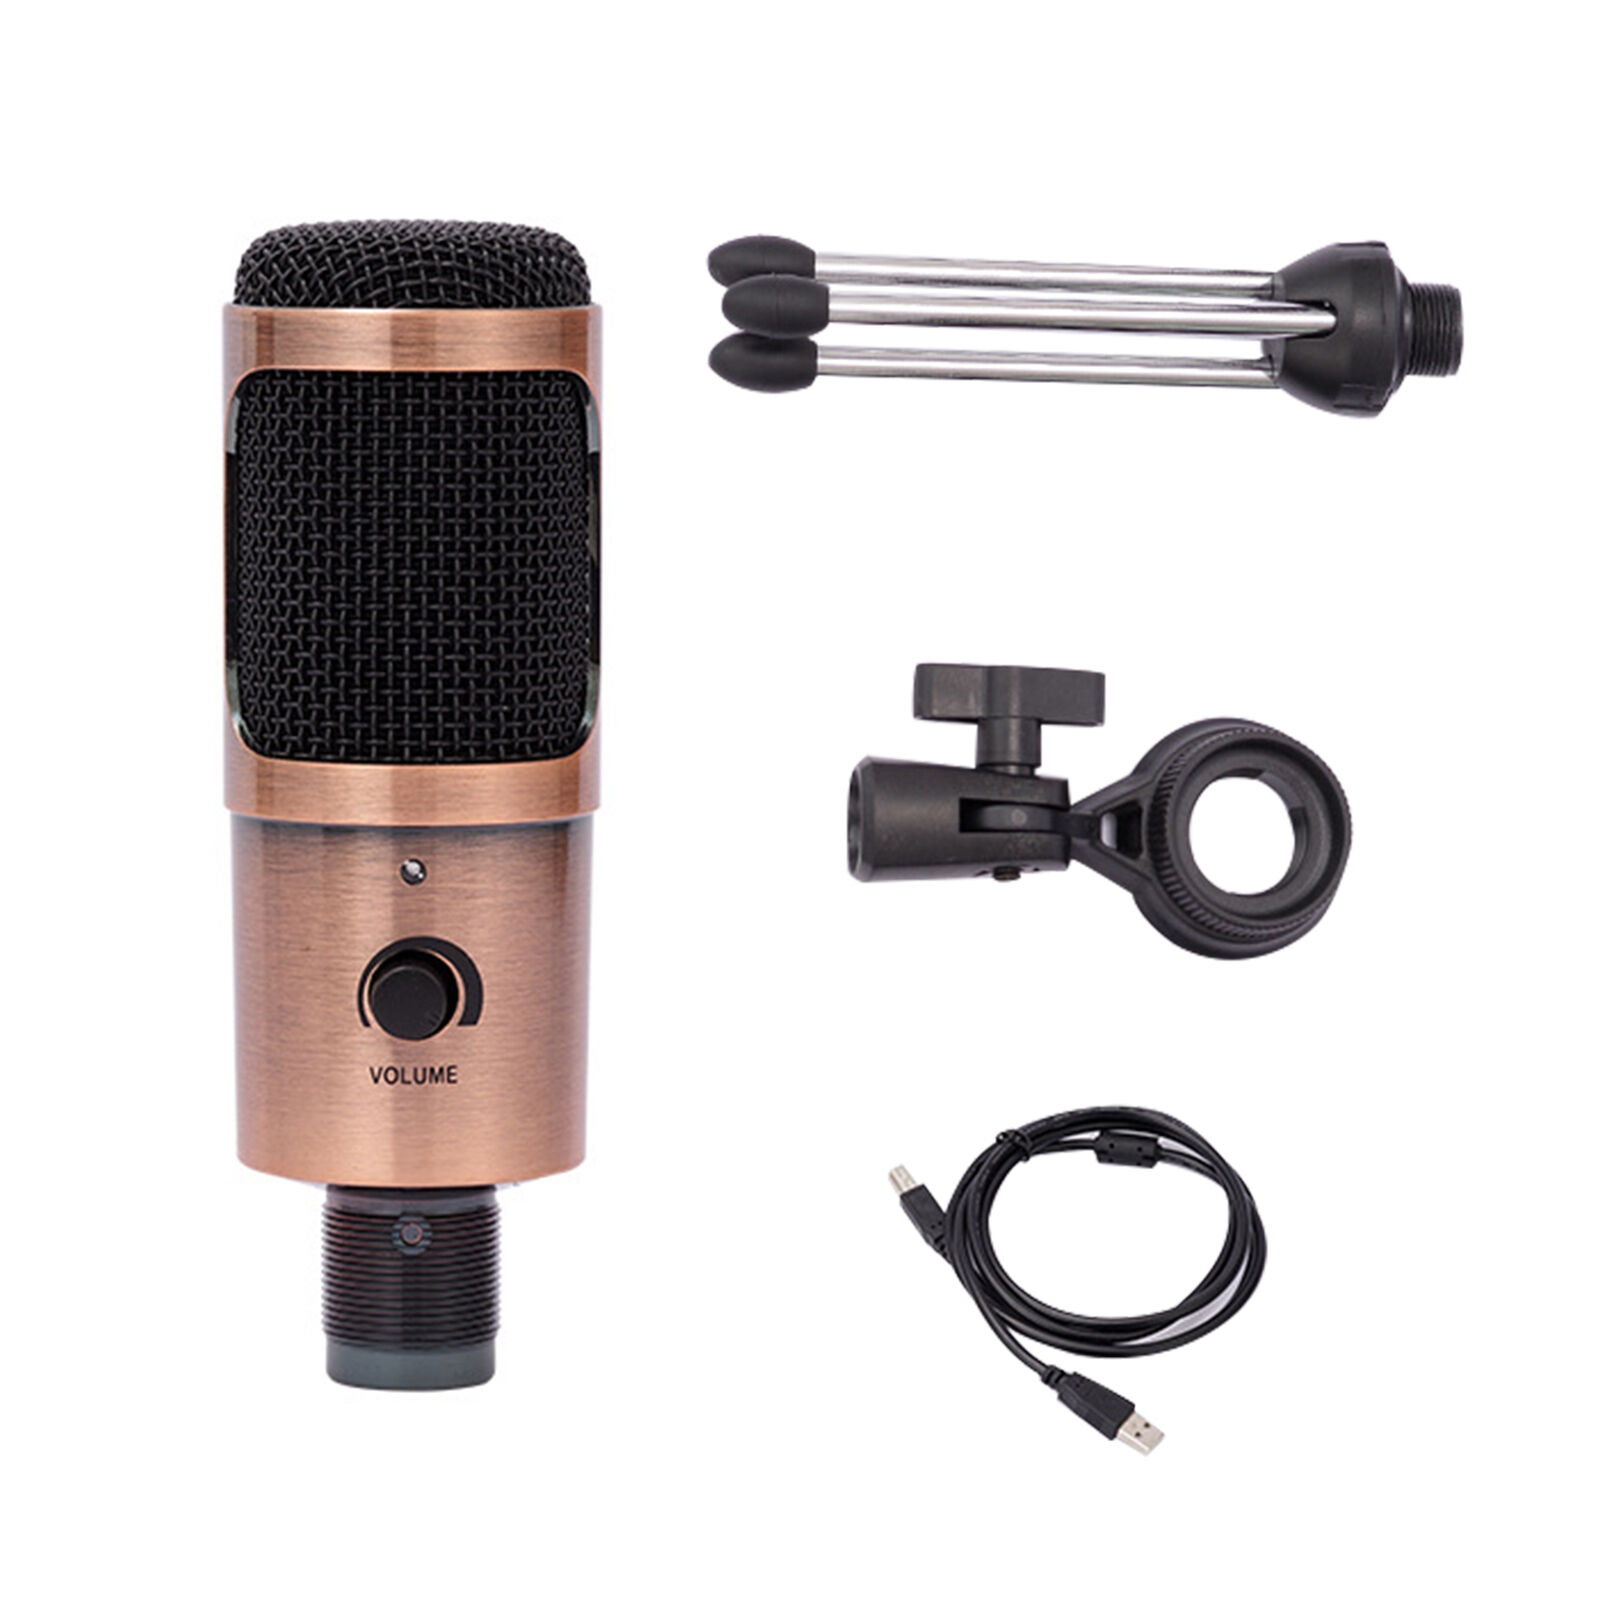 Wired Microphone Wired Volume Adjustment Plug Play Handheld Microphone Practical